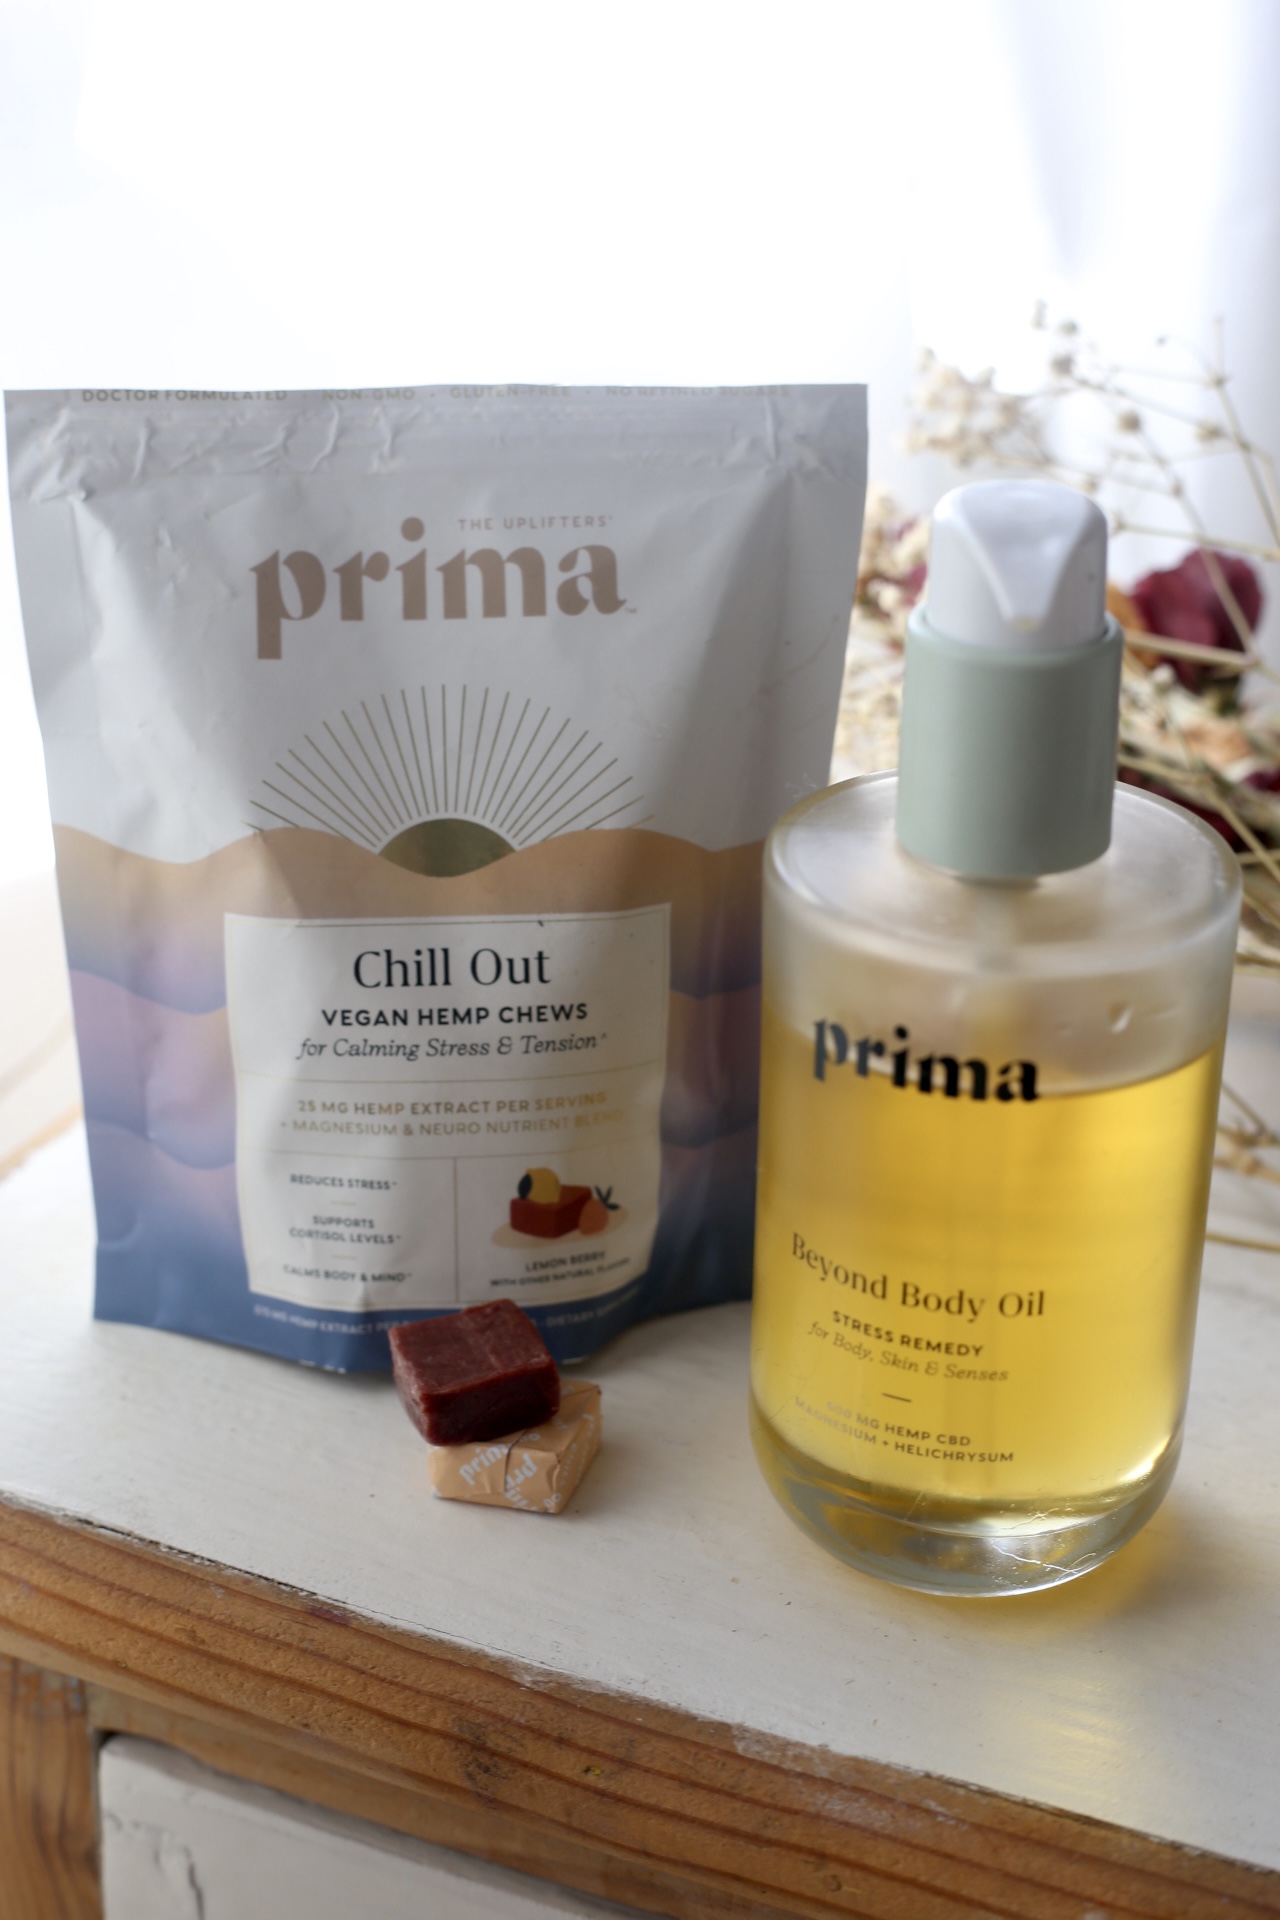 Prima Hemp Review: Must Read Before Buying